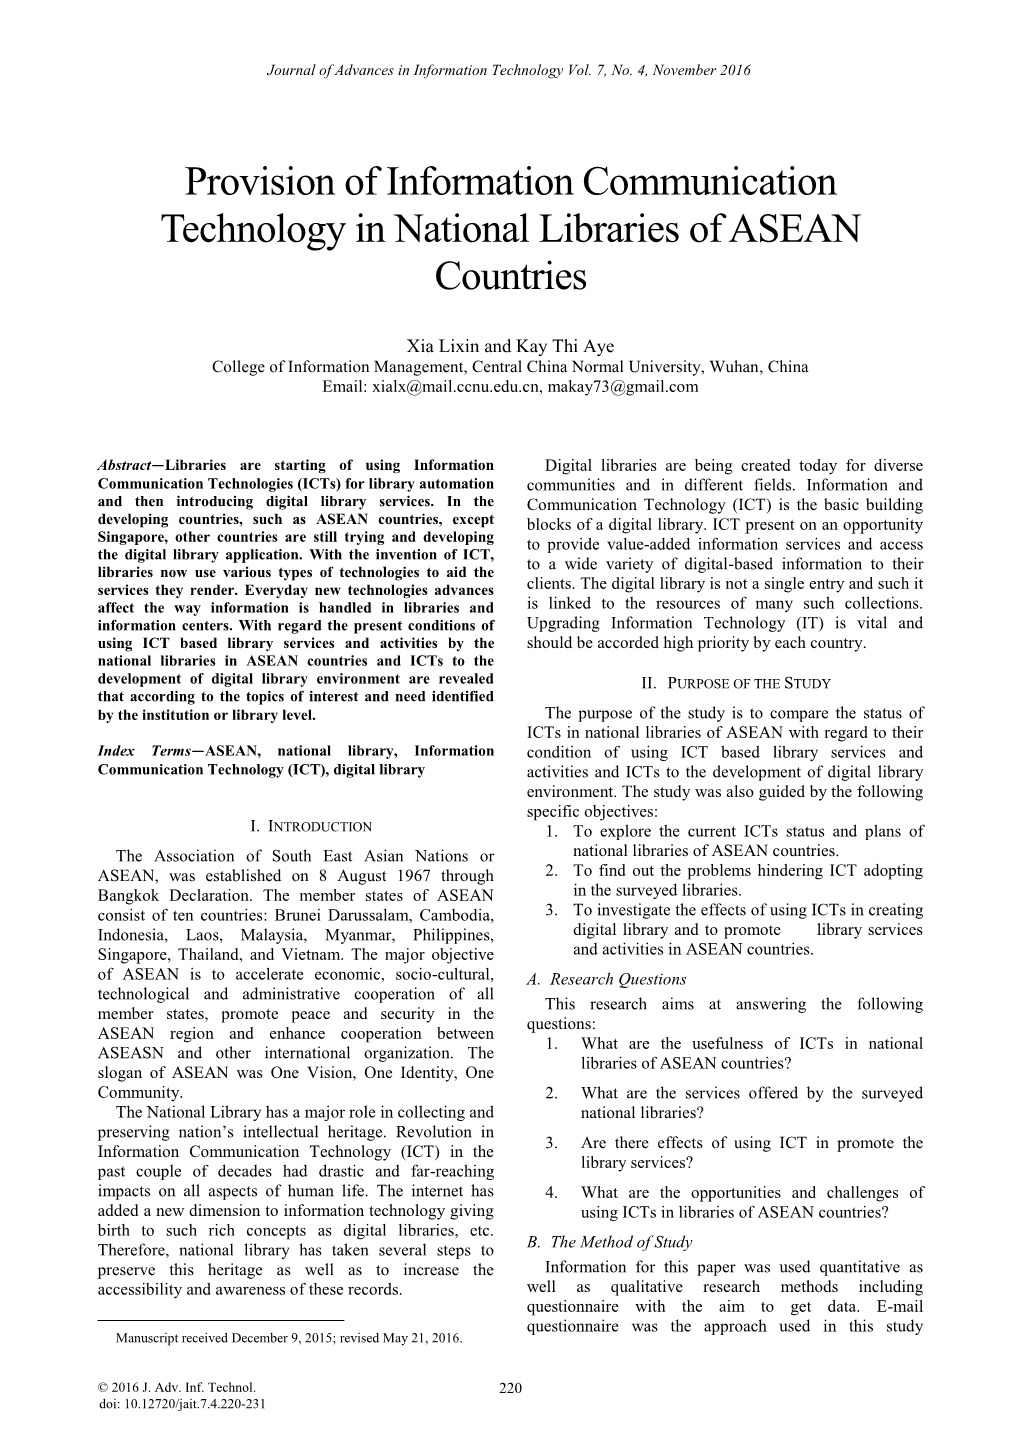 Provision of Information Communication Technology in National Libraries of ASEAN Countries